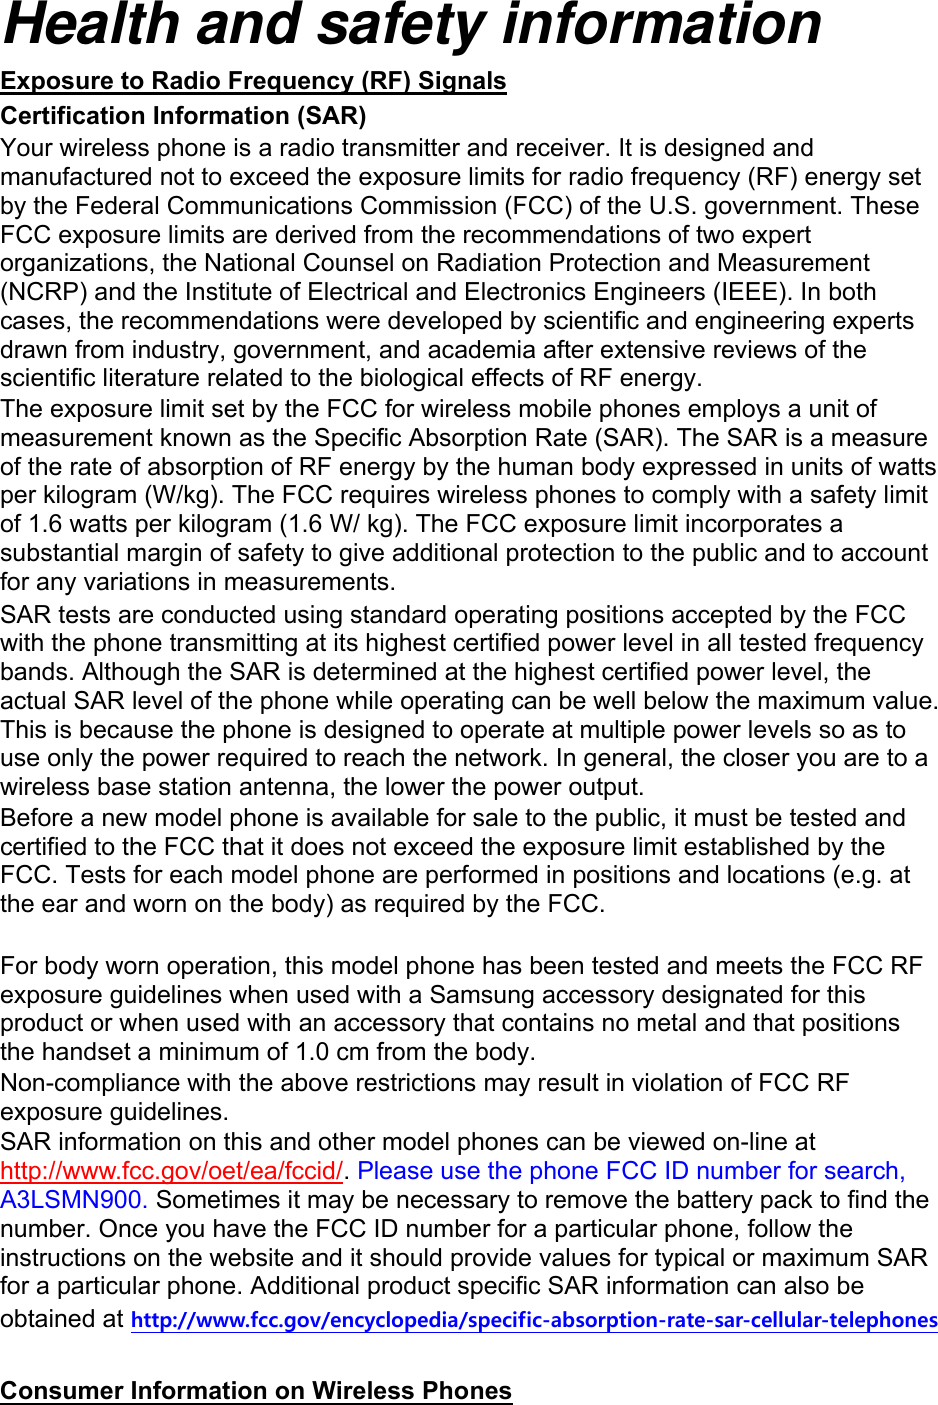 Health and safety information Exposure to Radio Frequency (RF) Signals Certification Information (SAR) Your wireless phone is a radio transmitter and receiver. It is designed and manufactured not to exceed the exposure limits for radio frequency (RF) energy set by the Federal Communications Commission (FCC) of the U.S. government. These FCC exposure limits are derived from the recommendations of two expert organizations, the National Counsel on Radiation Protection and Measurement (NCRP) and the Institute of Electrical and Electronics Engineers (IEEE). In both cases, the recommendations were developed by scientific and engineering experts drawn from industry, government, and academia after extensive reviews of the scientific literature related to the biological effects of RF energy. The exposure limit set by the FCC for wireless mobile phones employs a unit of measurement known as the Specific Absorption Rate (SAR). The SAR is a measure of the rate of absorption of RF energy by the human body expressed in units of watts per kilogram (W/kg). The FCC requires wireless phones to comply with a safety limit of 1.6 watts per kilogram (1.6 W/ kg). The FCC exposure limit incorporates a substantial margin of safety to give additional protection to the public and to account for any variations in measurements. SAR tests are conducted using standard operating positions accepted by the FCC with the phone transmitting at its highest certified power level in all tested frequency bands. Although the SAR is determined at the highest certified power level, the actual SAR level of the phone while operating can be well below the maximum value. This is because the phone is designed to operate at multiple power levels so as to use only the power required to reach the network. In general, the closer you are to a wireless base station antenna, the lower the power output. Before a new model phone is available for sale to the public, it must be tested and certified to the FCC that it does not exceed the exposure limit established by the FCC. Tests for each model phone are performed in positions and locations (e.g. at the ear and worn on the body) as required by the FCC.      For body worn operation, this model phone has been tested and meets the FCC RF exposure guidelines when used with a Samsung accessory designated for this product or when used with an accessory that contains no metal and that positions the handset a minimum of 1.0 cm from the body.   Non-compliance with the above restrictions may result in violation of FCC RF exposure guidelines. SAR information on this and other model phones can be viewed on-line at http://www.fcc.gov/oet/ea/fccid/. Please use the phone FCC ID number for search, A3LSMN900. Sometimes it may be necessary to remove the battery pack to find the number. Once you have the FCC ID number for a particular phone, follow the instructions on the website and it should provide values for typical or maximum SAR for a particular phone. Additional product specific SAR information can also be obtained at http://www.fcc.gov/encyclopedia/specific-absorption-rate-sar-cellular-telephones  Consumer Information on Wireless Phones 